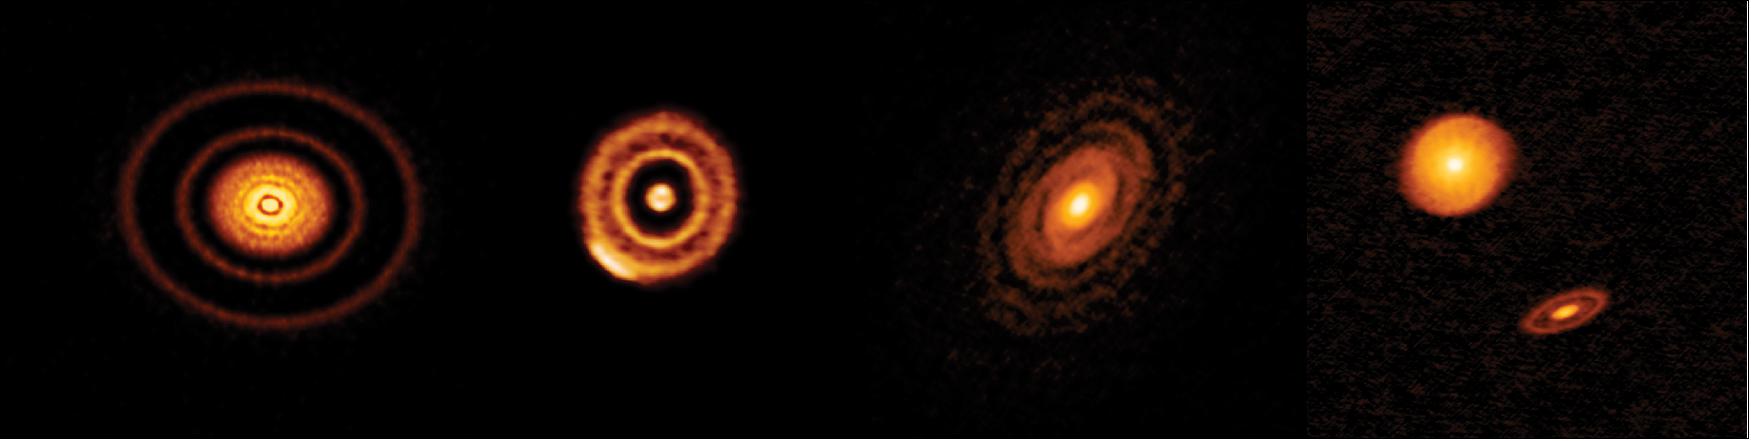 Figure 3: Four of the twenty disks that comprise ALMA's highest resolution survey of nearby protoplanetary disks. This image shows the millimeter-wavelength light emitted by the dust in the disk, giving astronomers a clearer understanding of the similarities and differences among the disks and what that has to say about planet formation (image credit: ALMA (ESO/NAOJ/NRAO), S. Andrews et al.; NRAO/AUI/NSF, S. Dagnello)